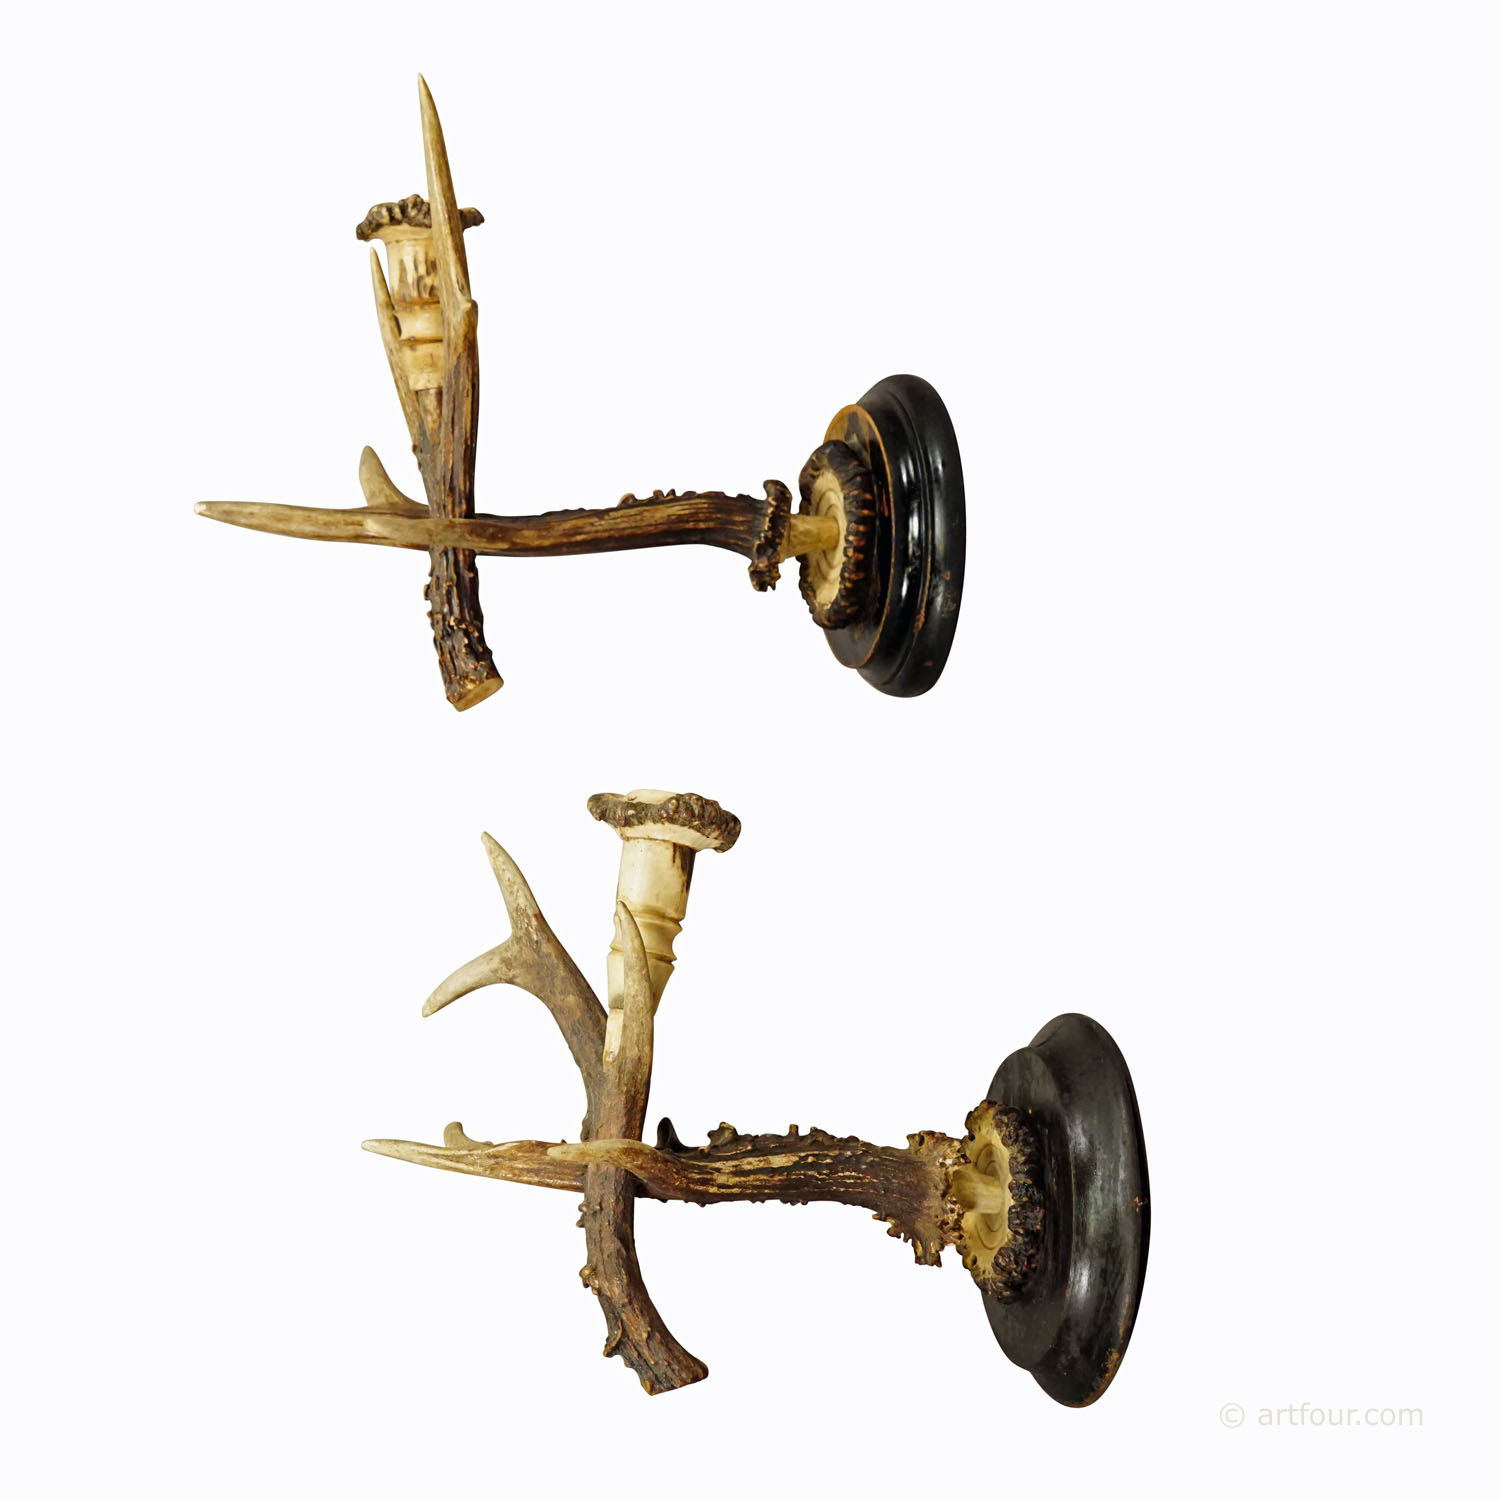 A Pair Black Forest Wall Sconces with Deer Horns, Germany ca. 1900